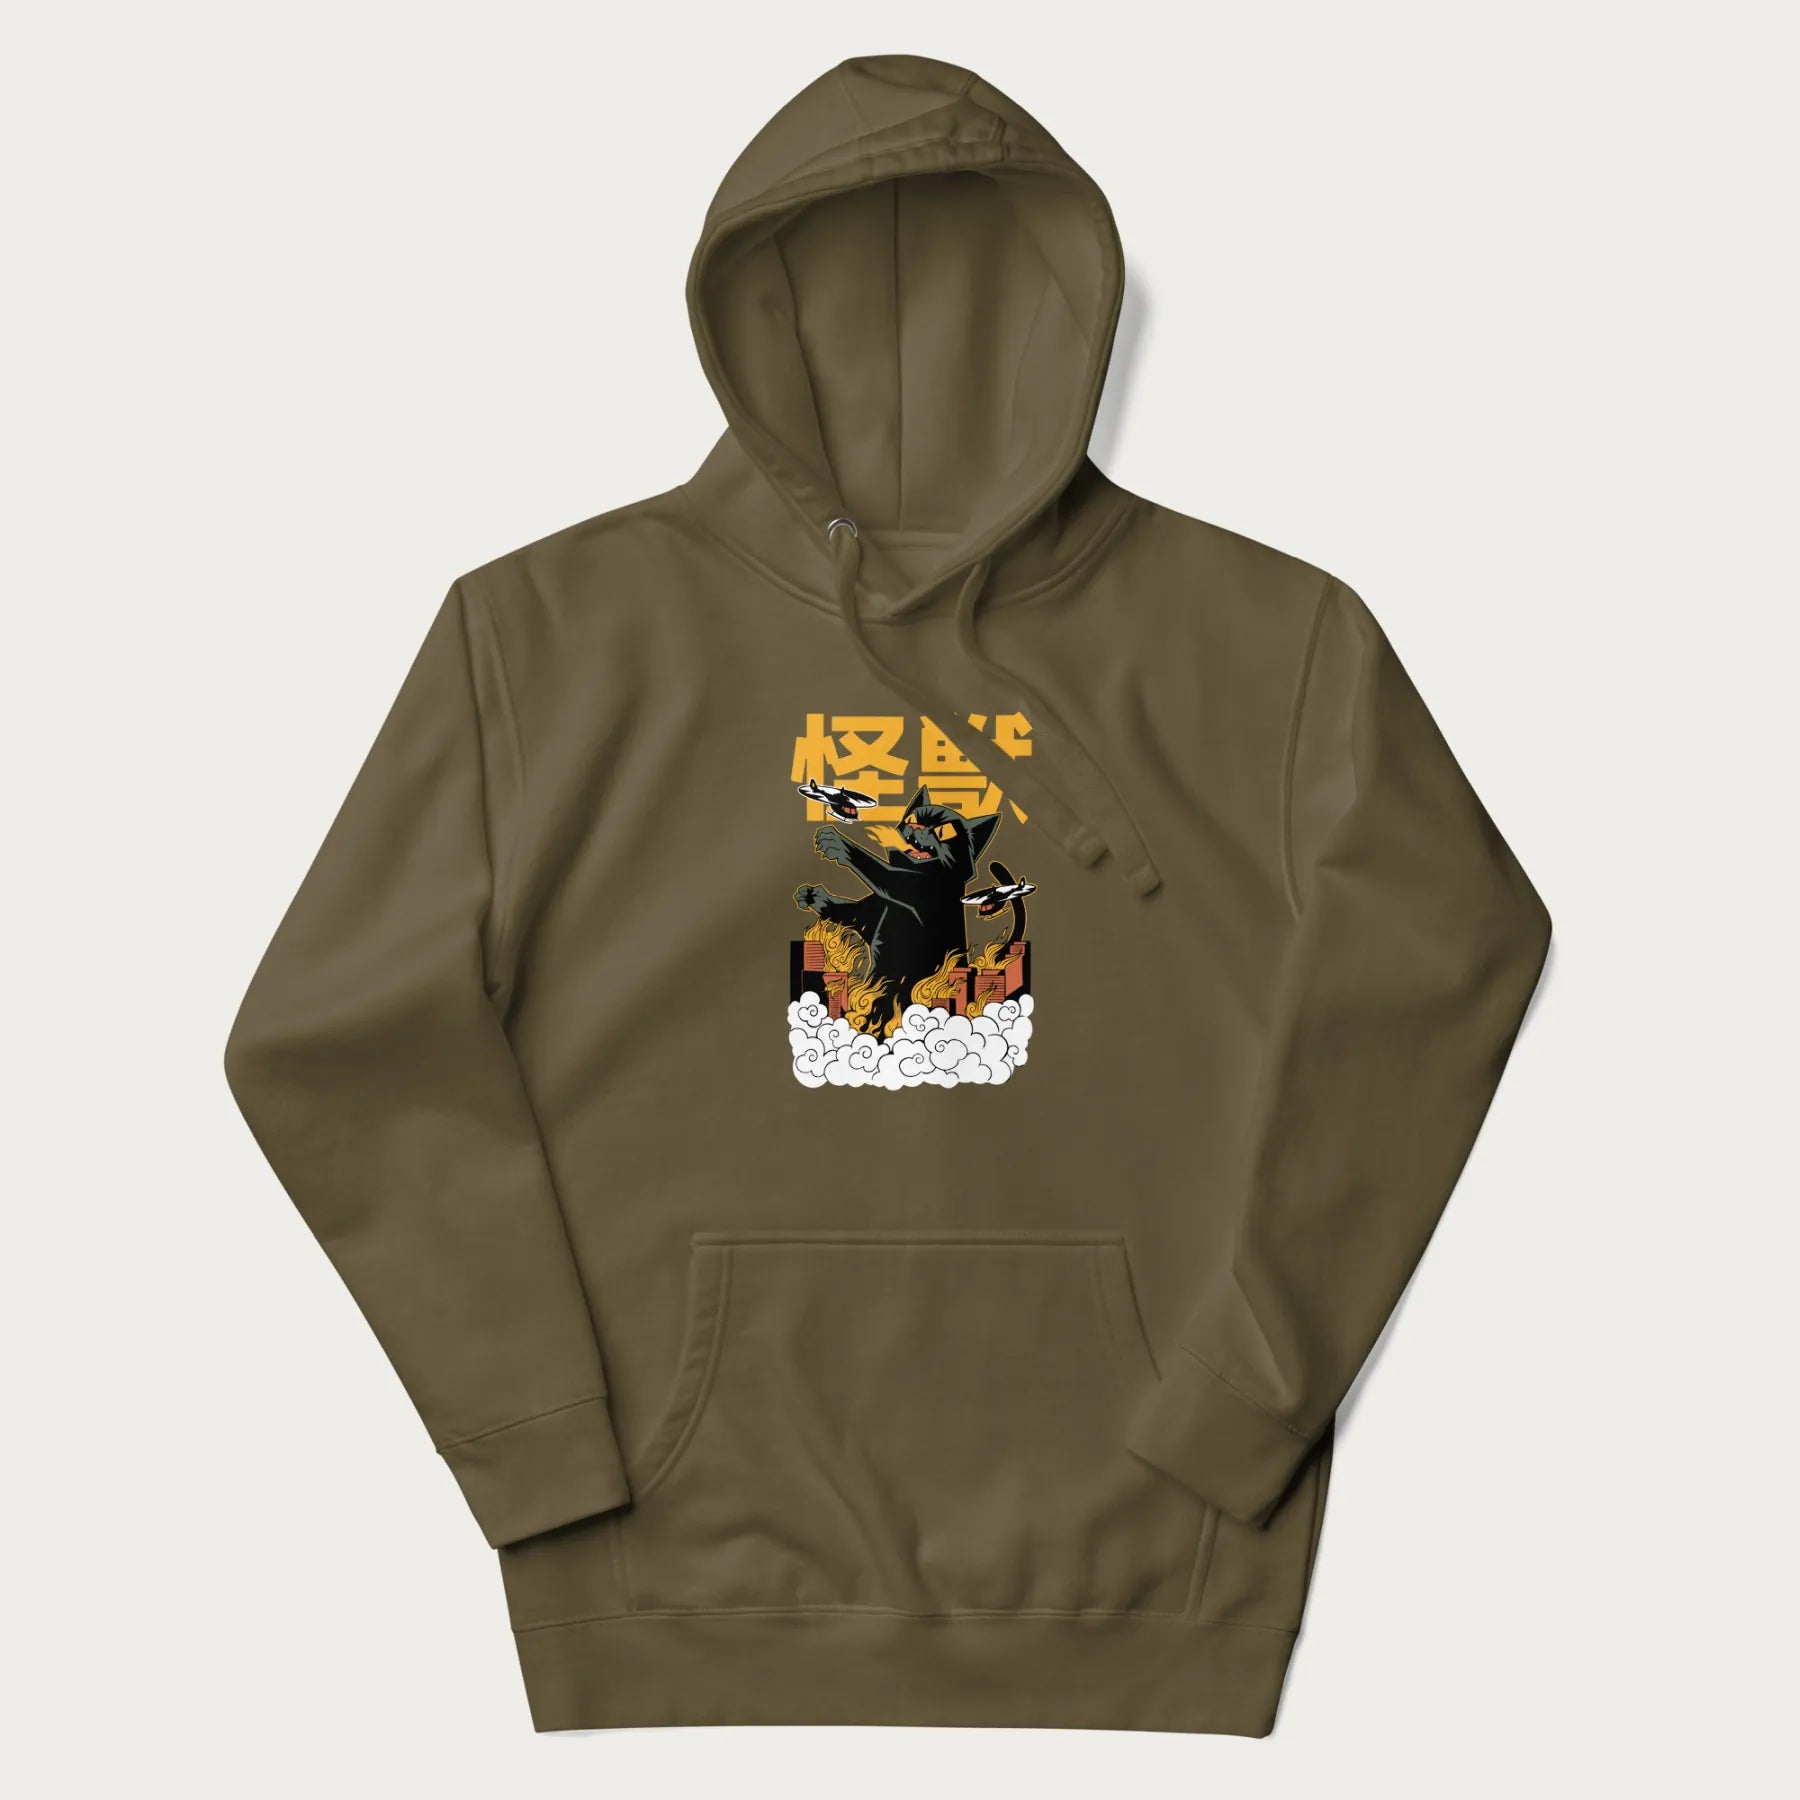 Military green hoodie with graphic of a 'Kaiju Cat' with helicopters and flames in a burning city.